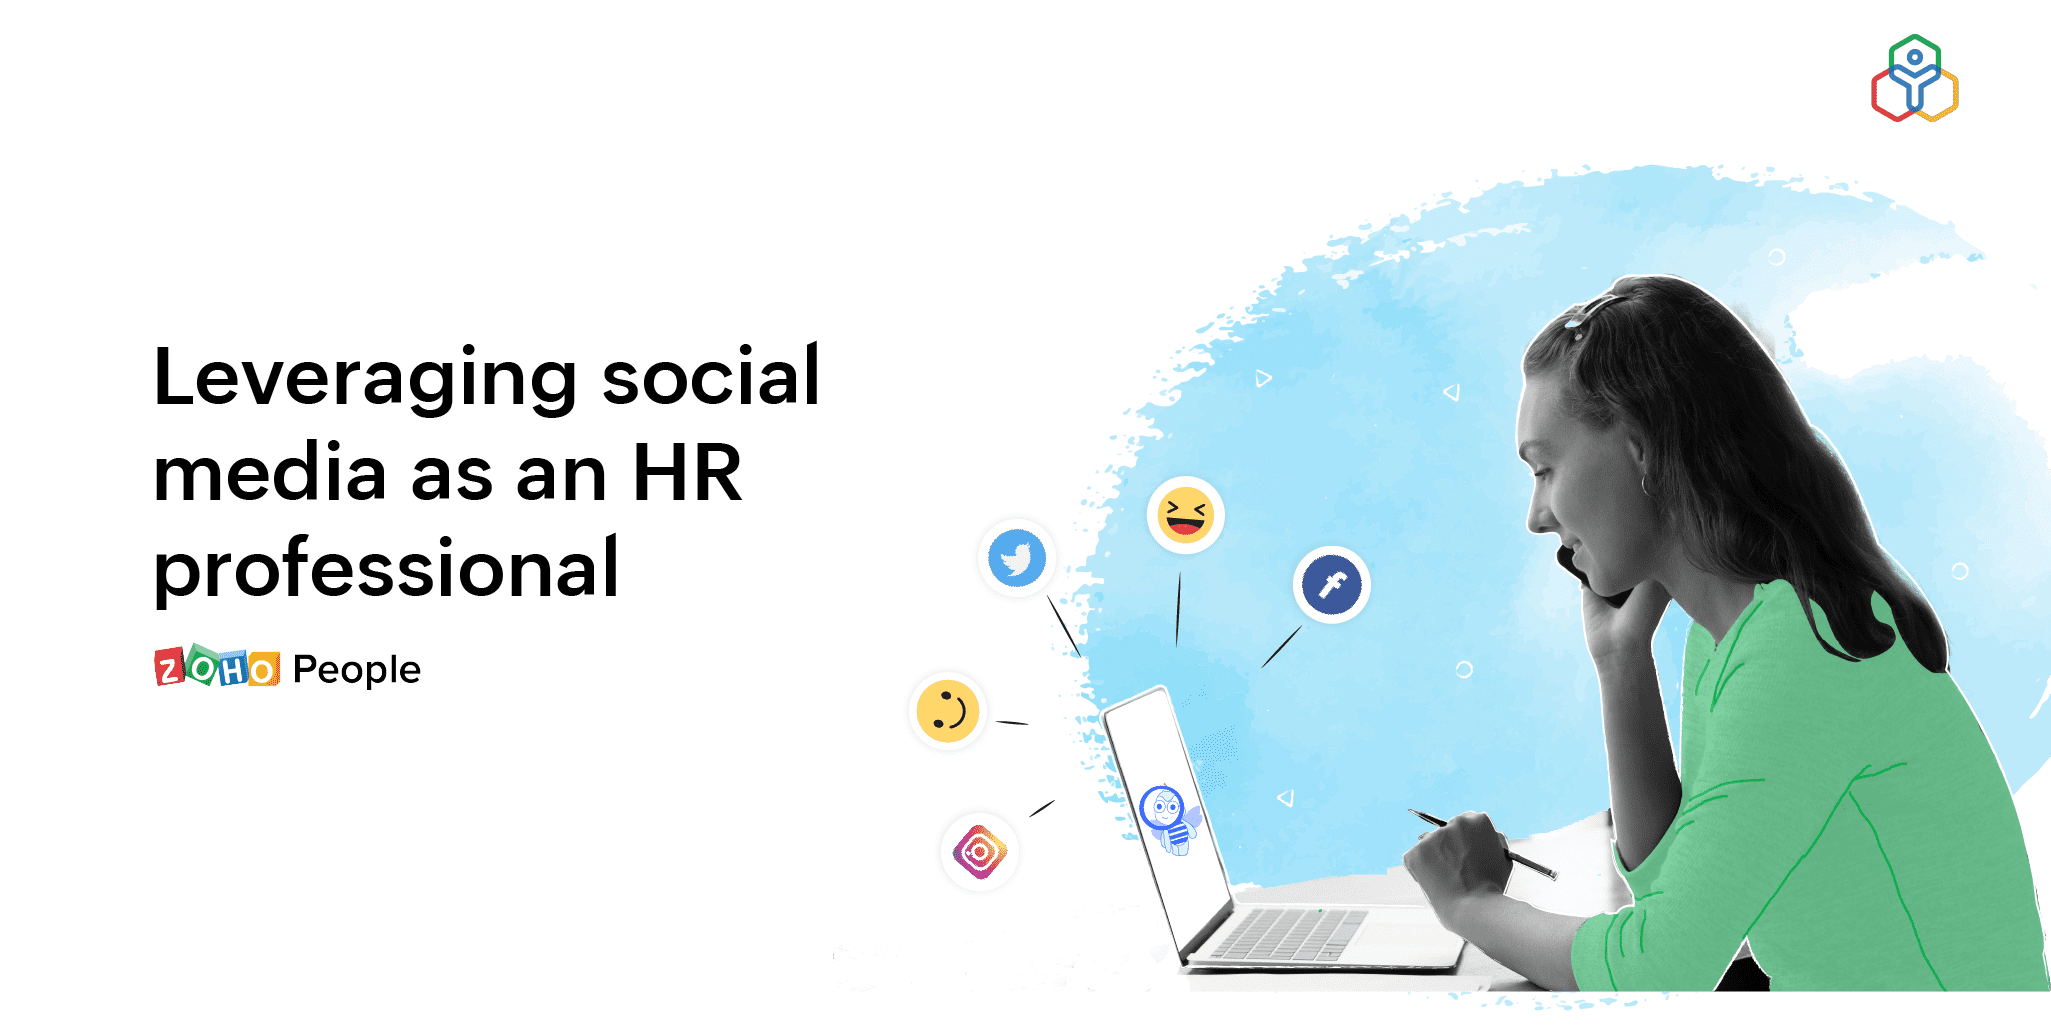 How HR professionals can leverage social media